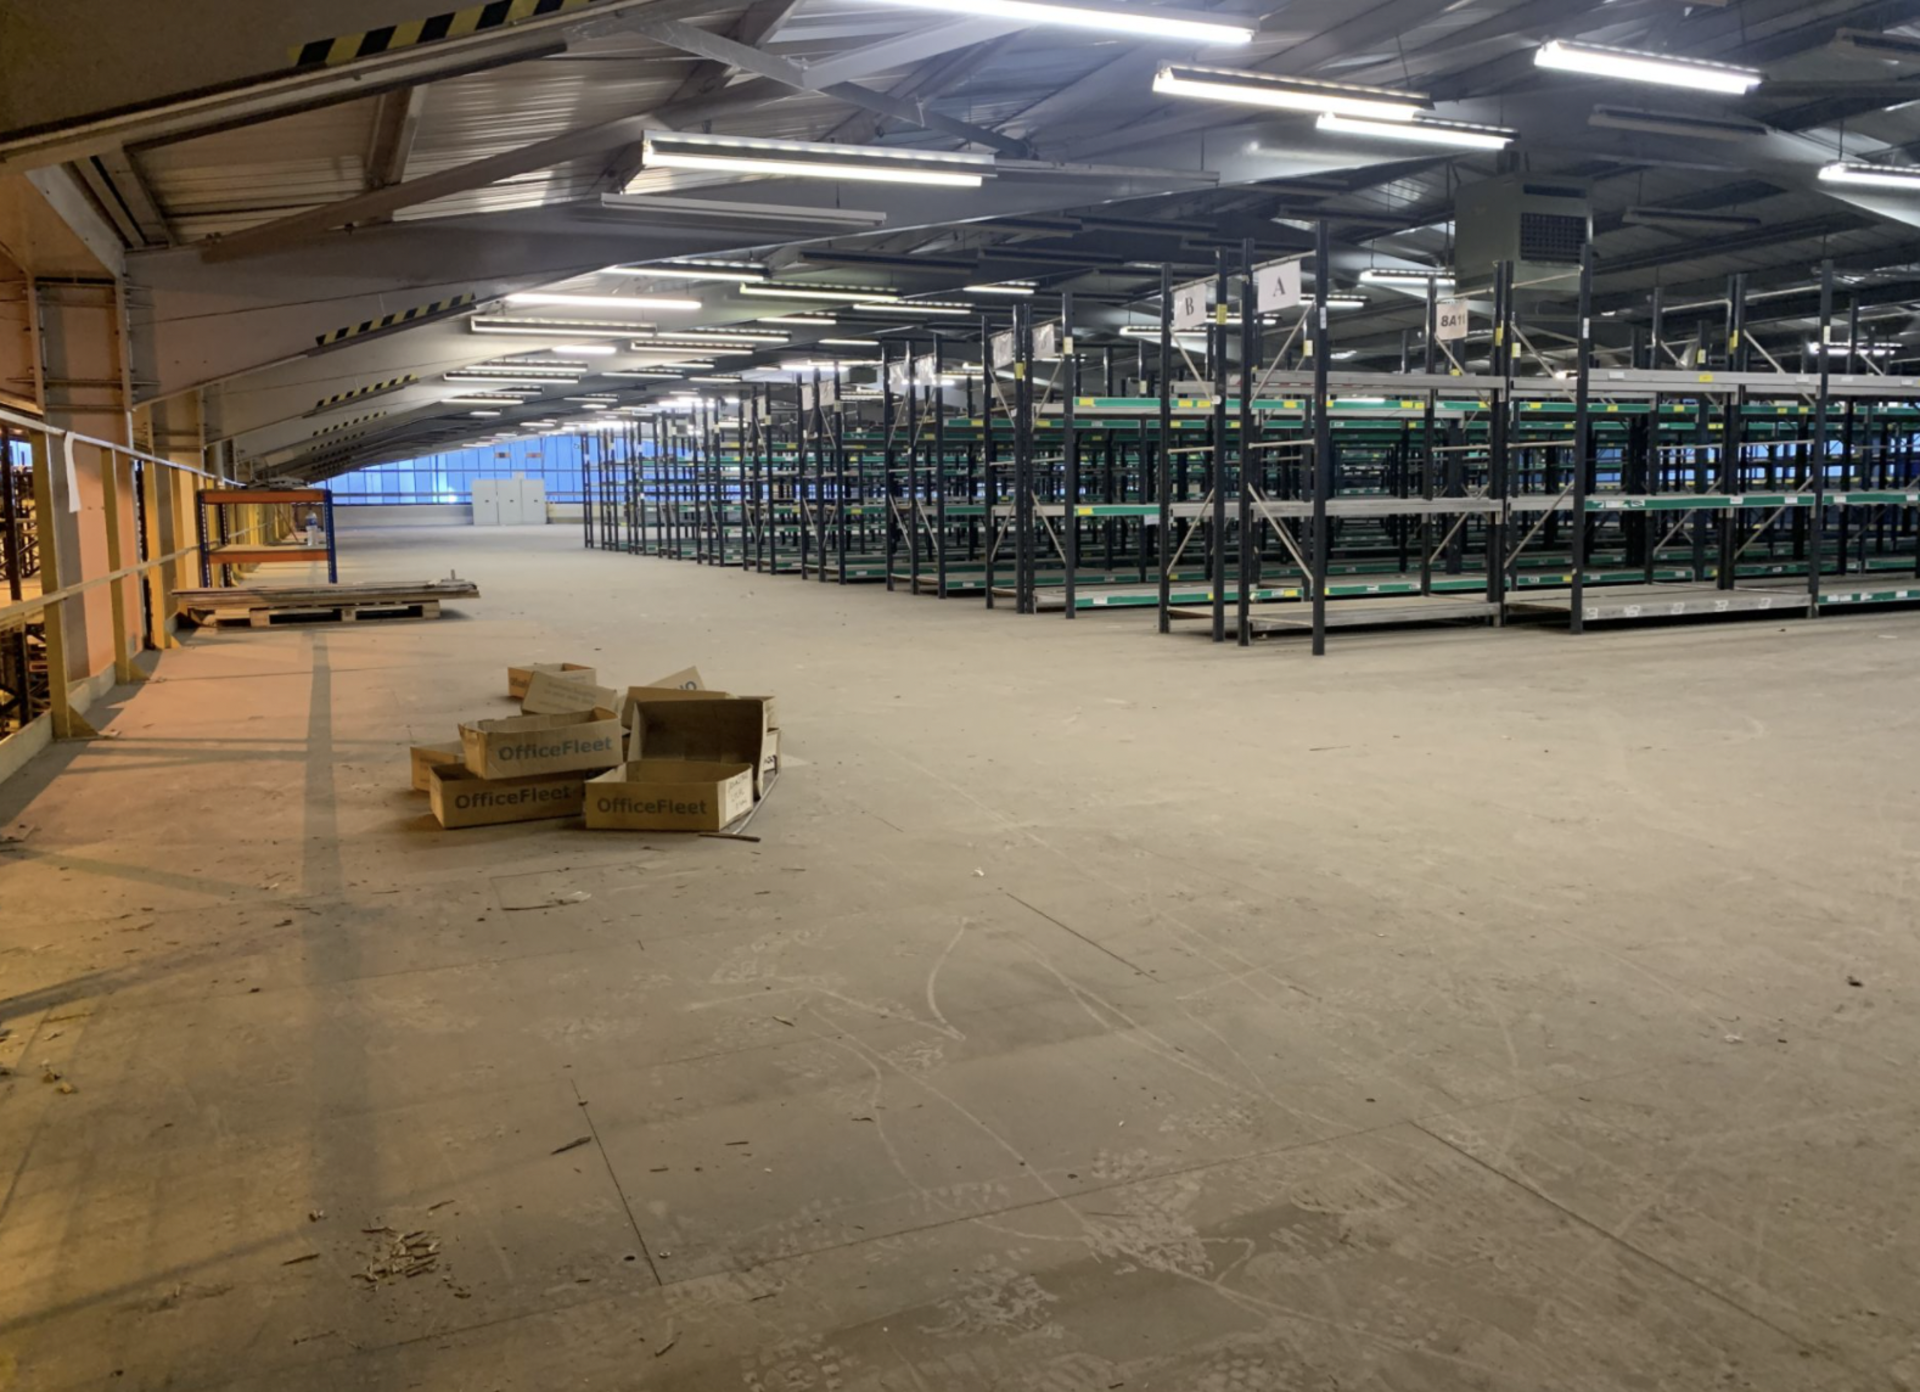 £500,000 MEZZANINE FLOOR 80m x 28m 3 stairs and loading bay inc - Image 19 of 21